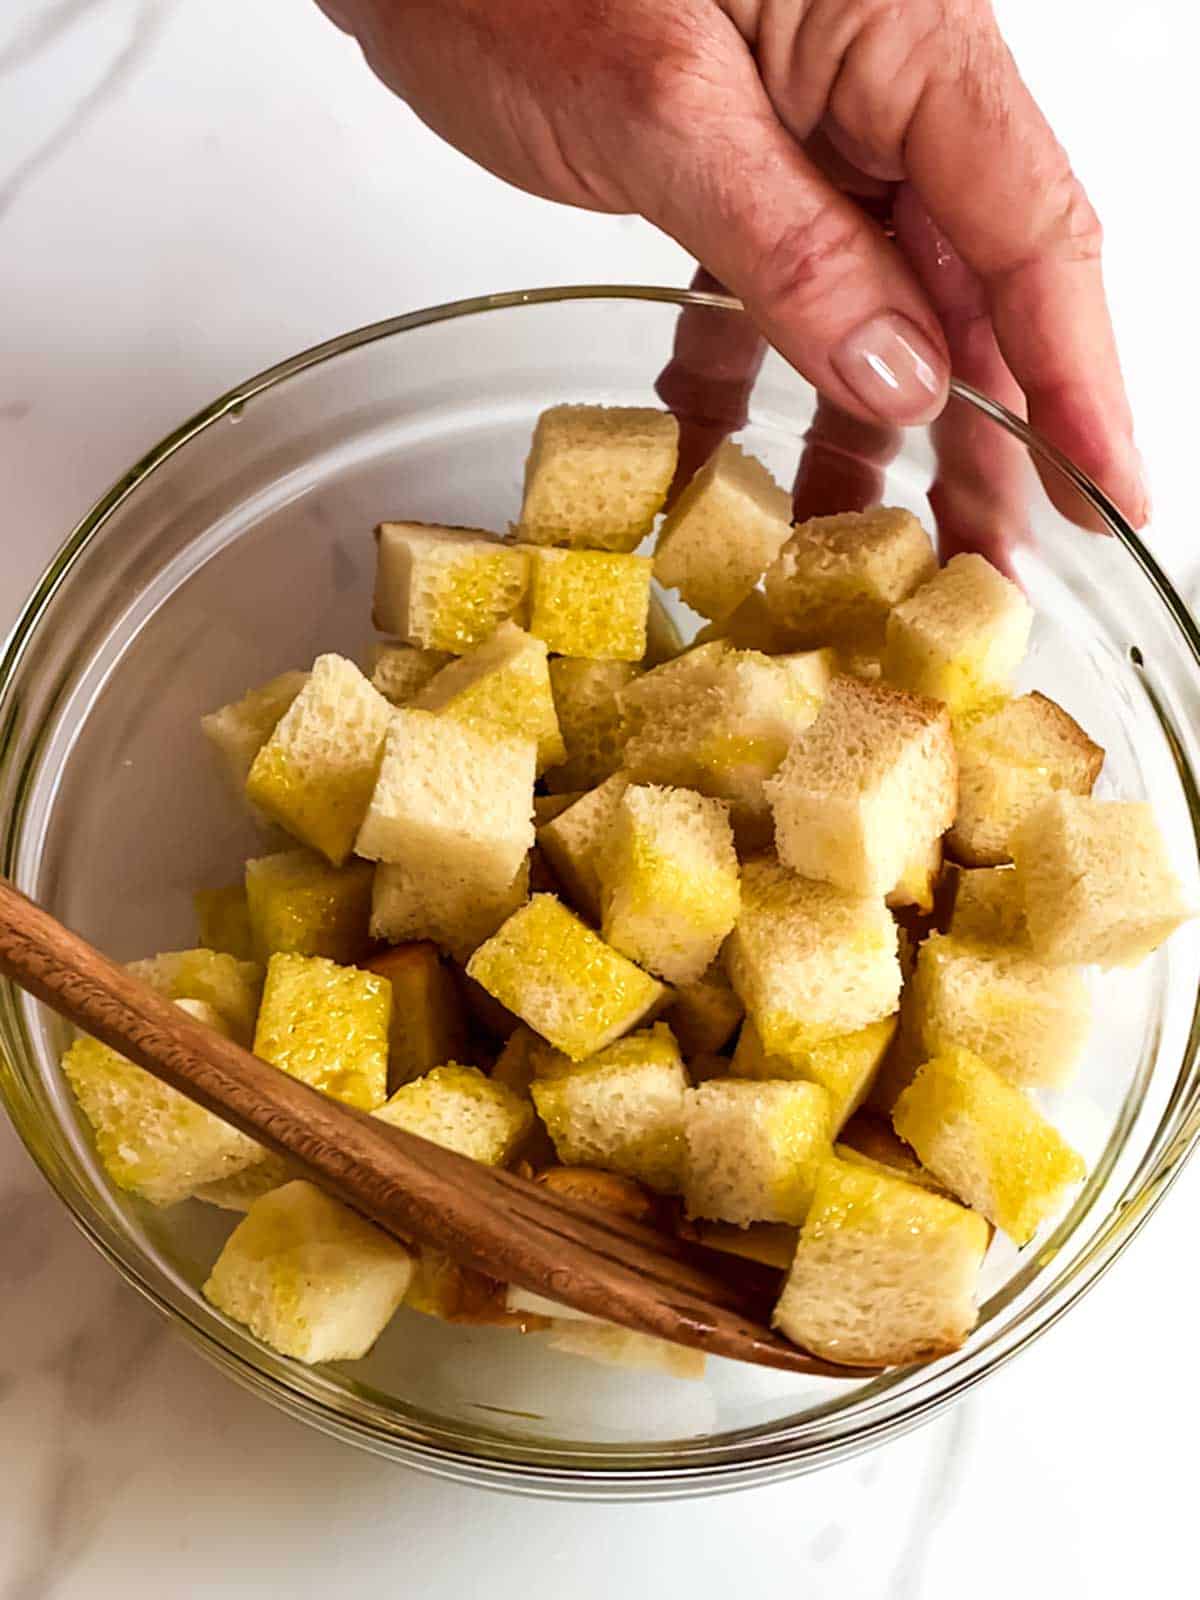 Coating bread cubes with infused olive oil.